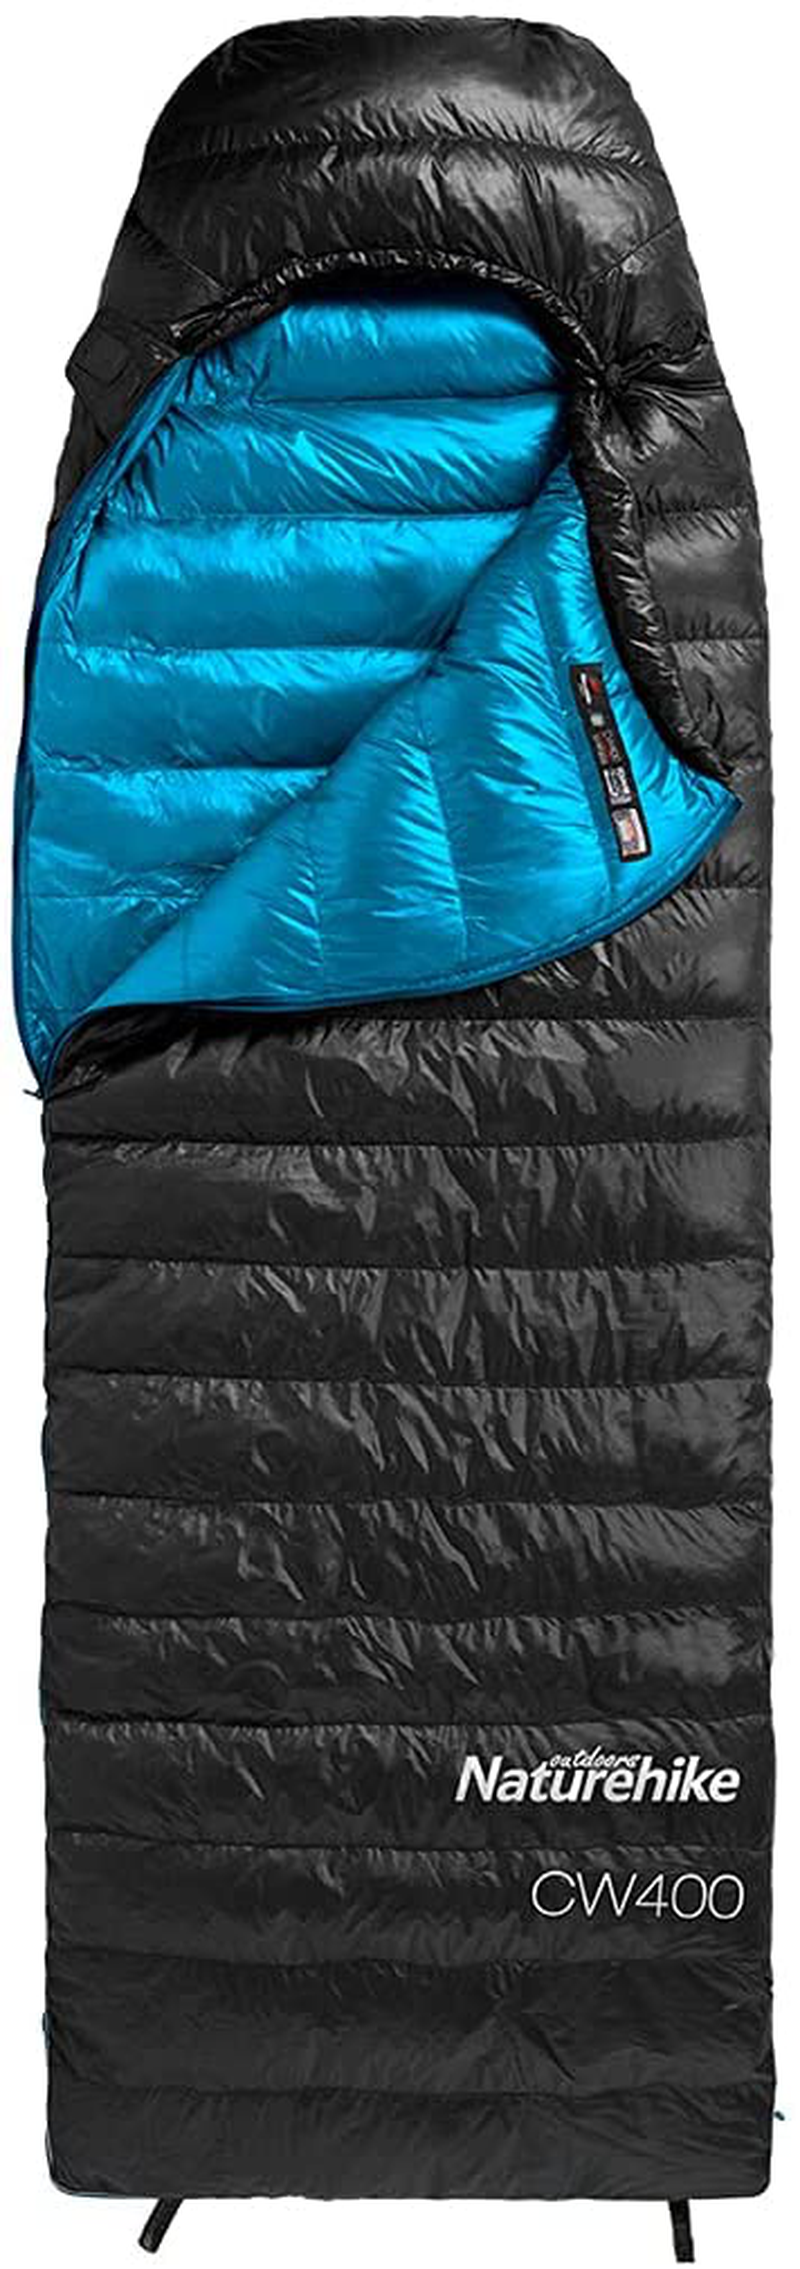 Naturehike Ultralight Goose down Sleeping Bag 750 Fill Power 4 Season Waterproof Compact for Adults & Kids -Cold Weather Sleeping Bags for Camping, Backpacking, Hiking, Traveling, Outdoor with Compression Sack Sporting Goods > Outdoor Recreation > Camping & Hiking > Sleeping Bags Naturehike CW400 Black Large 